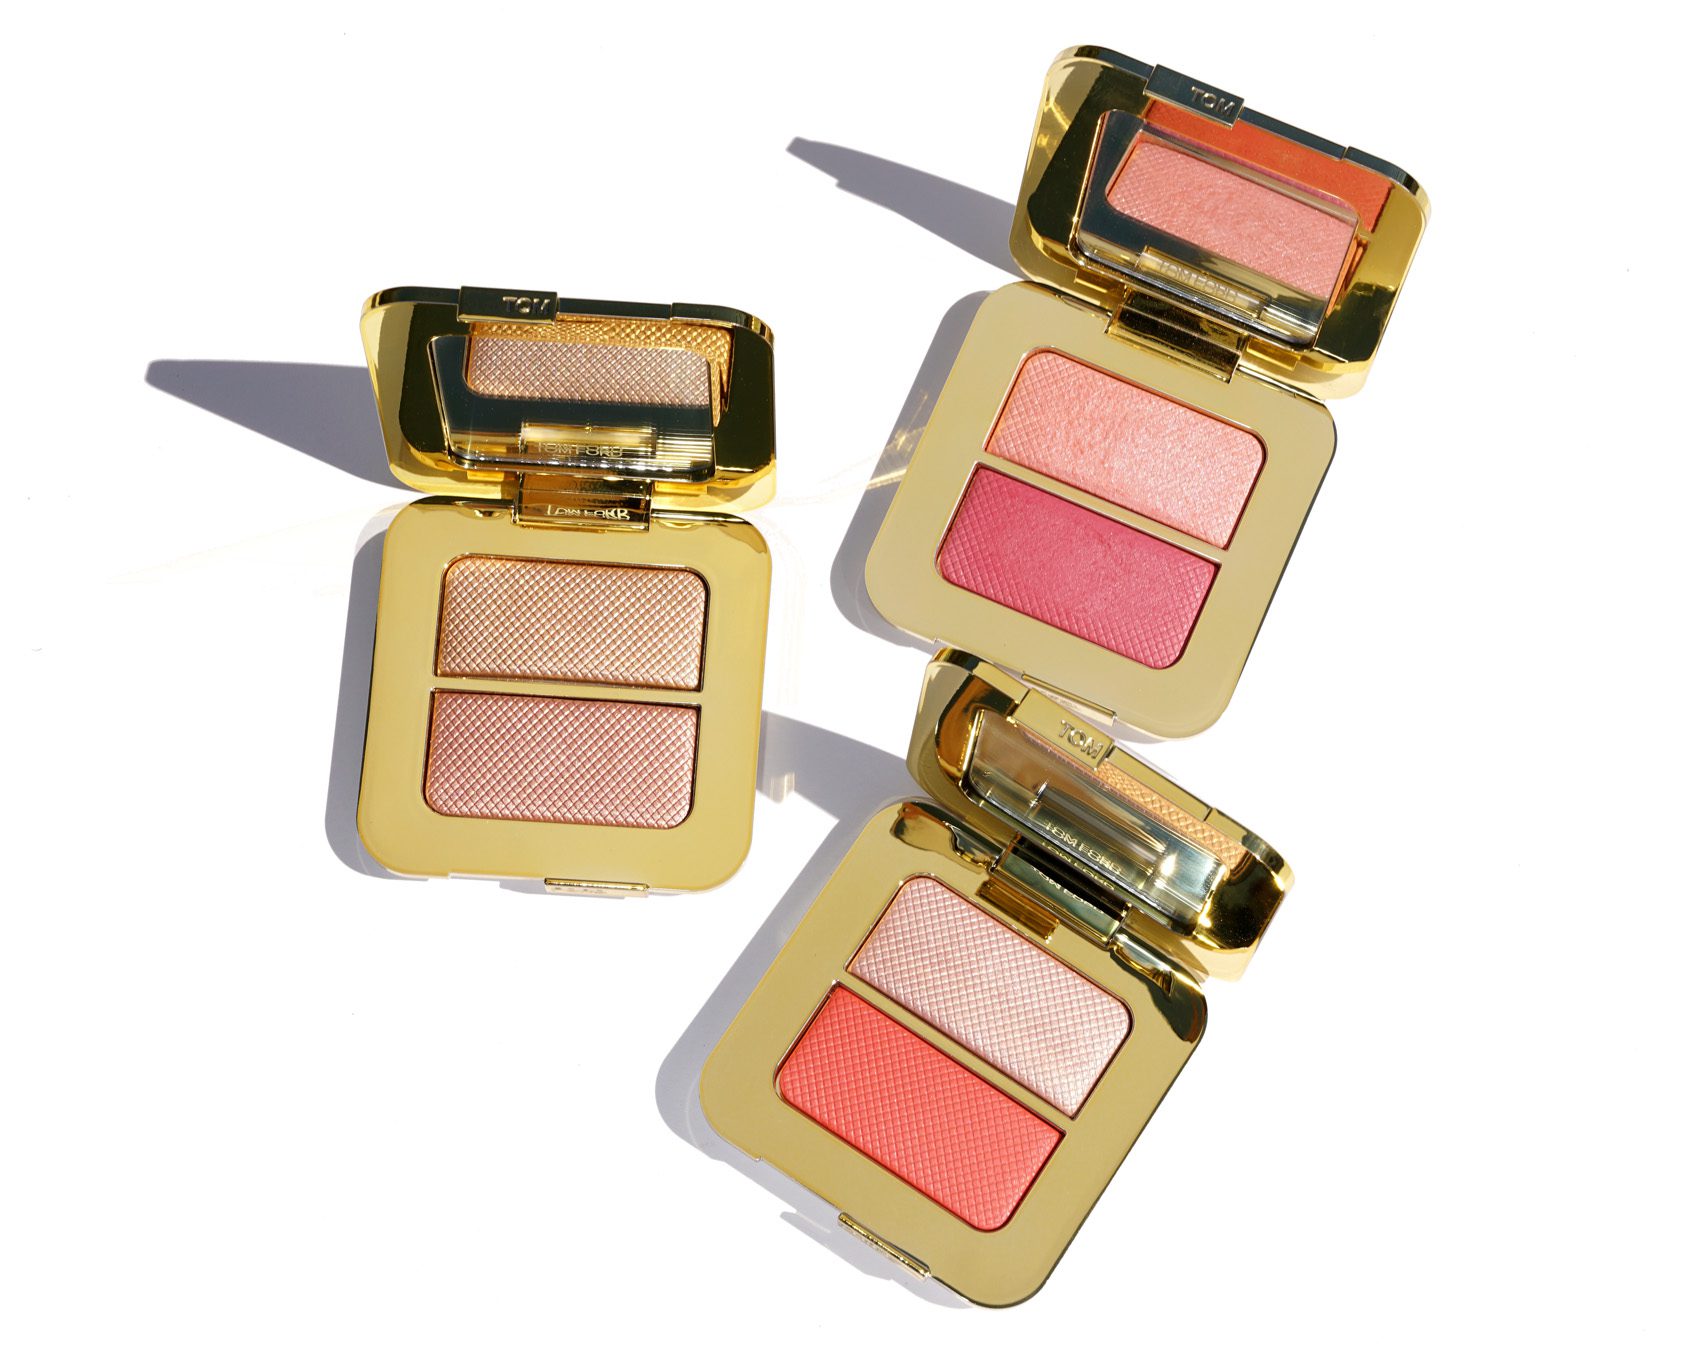 Tom Ford Beauty Summer Soleil Collection - The Beauty Look Book